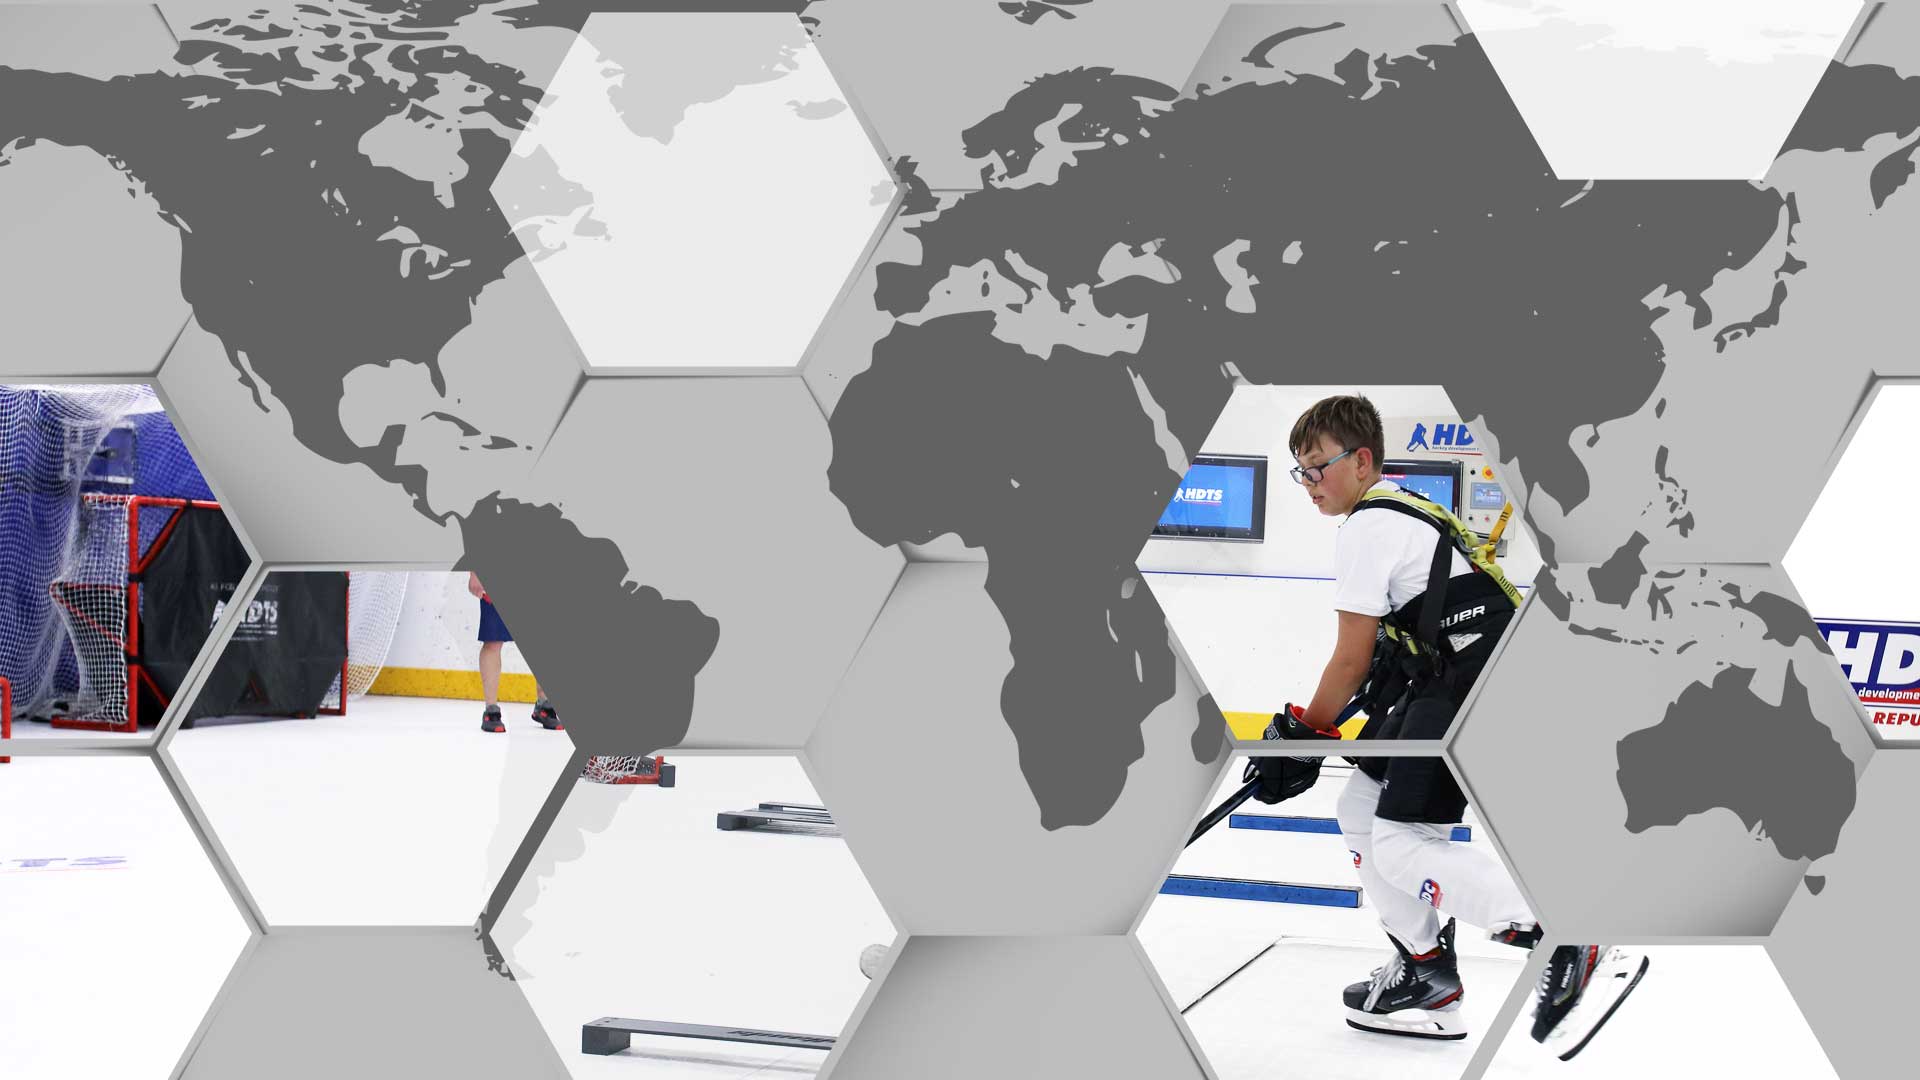 worldiwe network of hockey centers by hdts